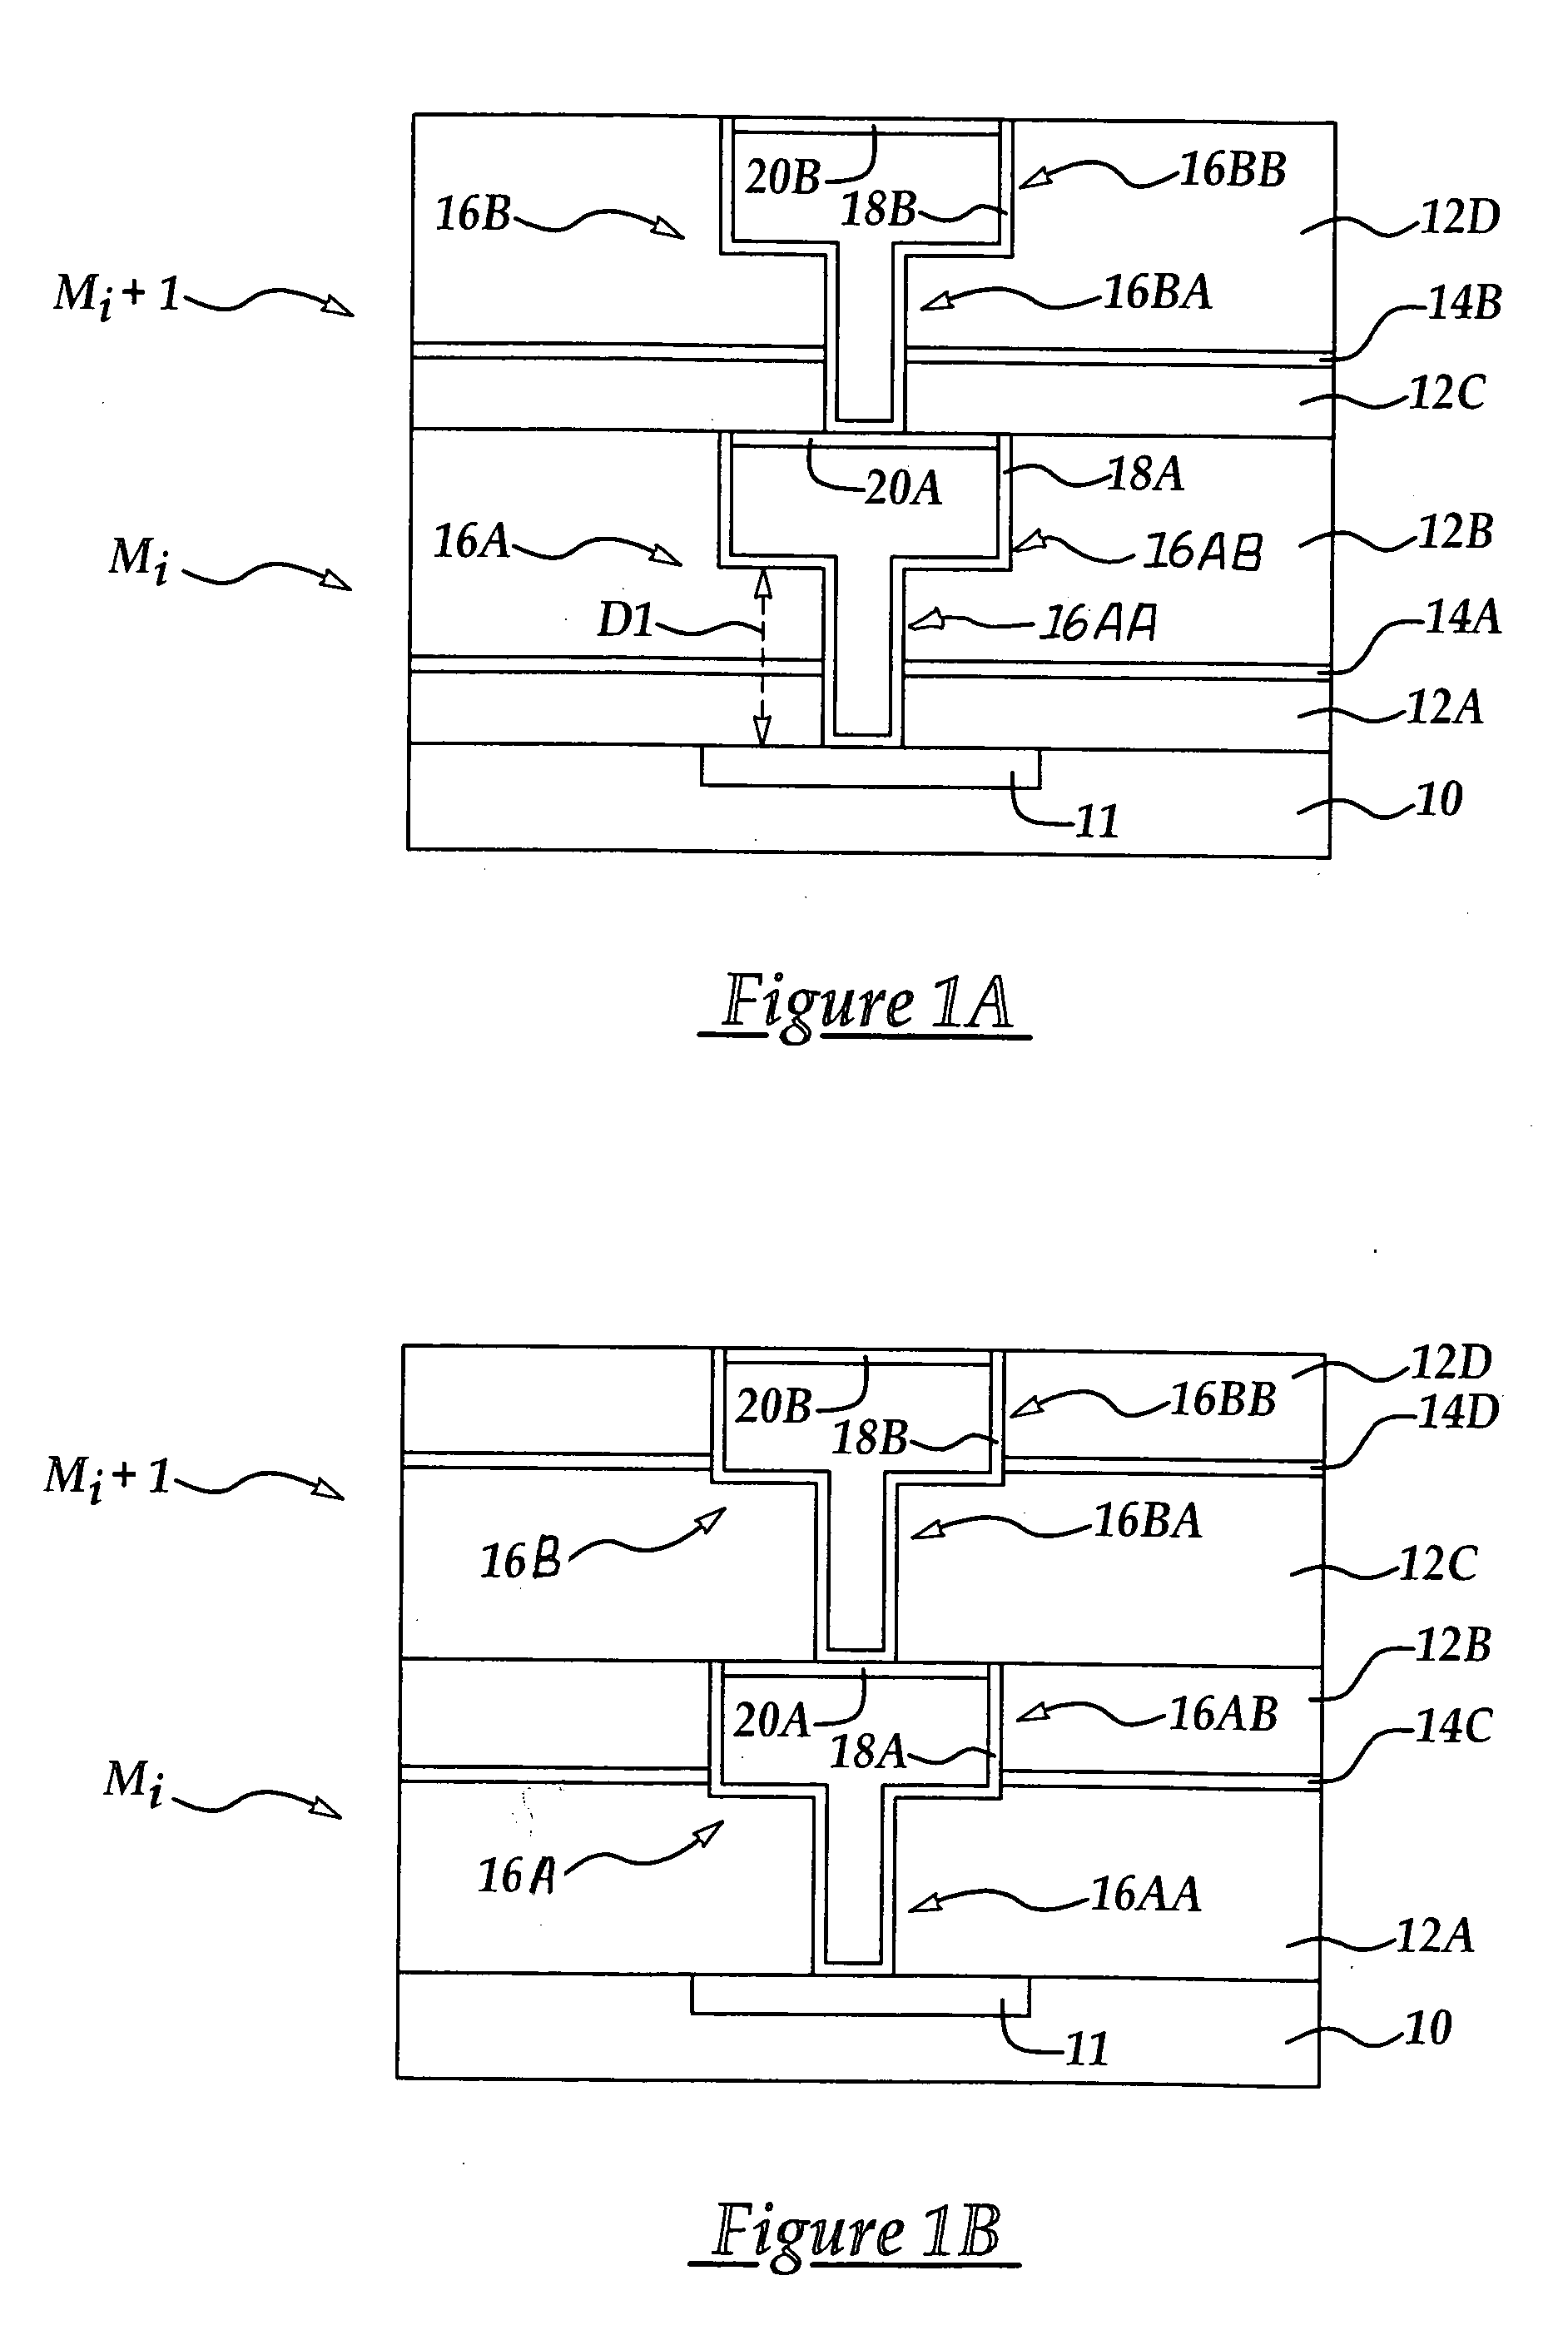 Metallization layers for crack prevention and reduced capacitance